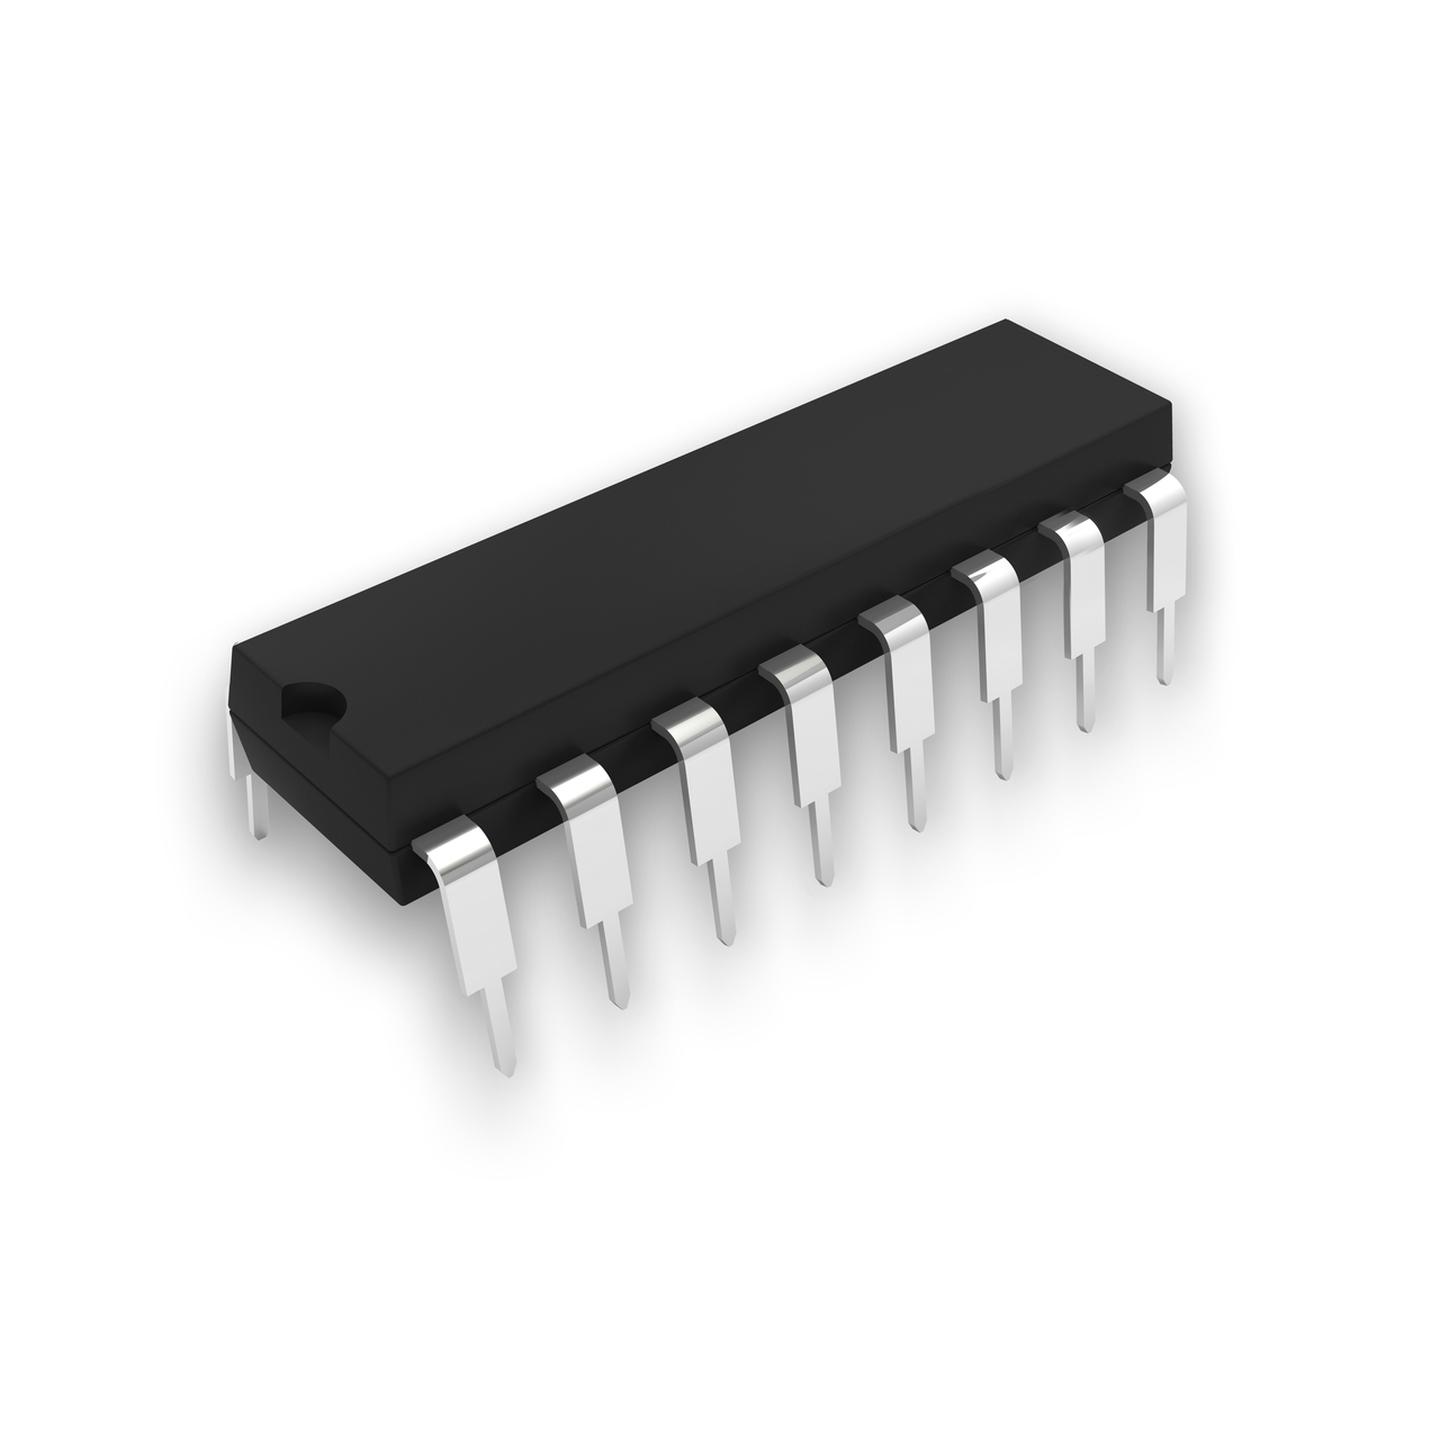 4518 Dual BCD Up counter CMOS IC